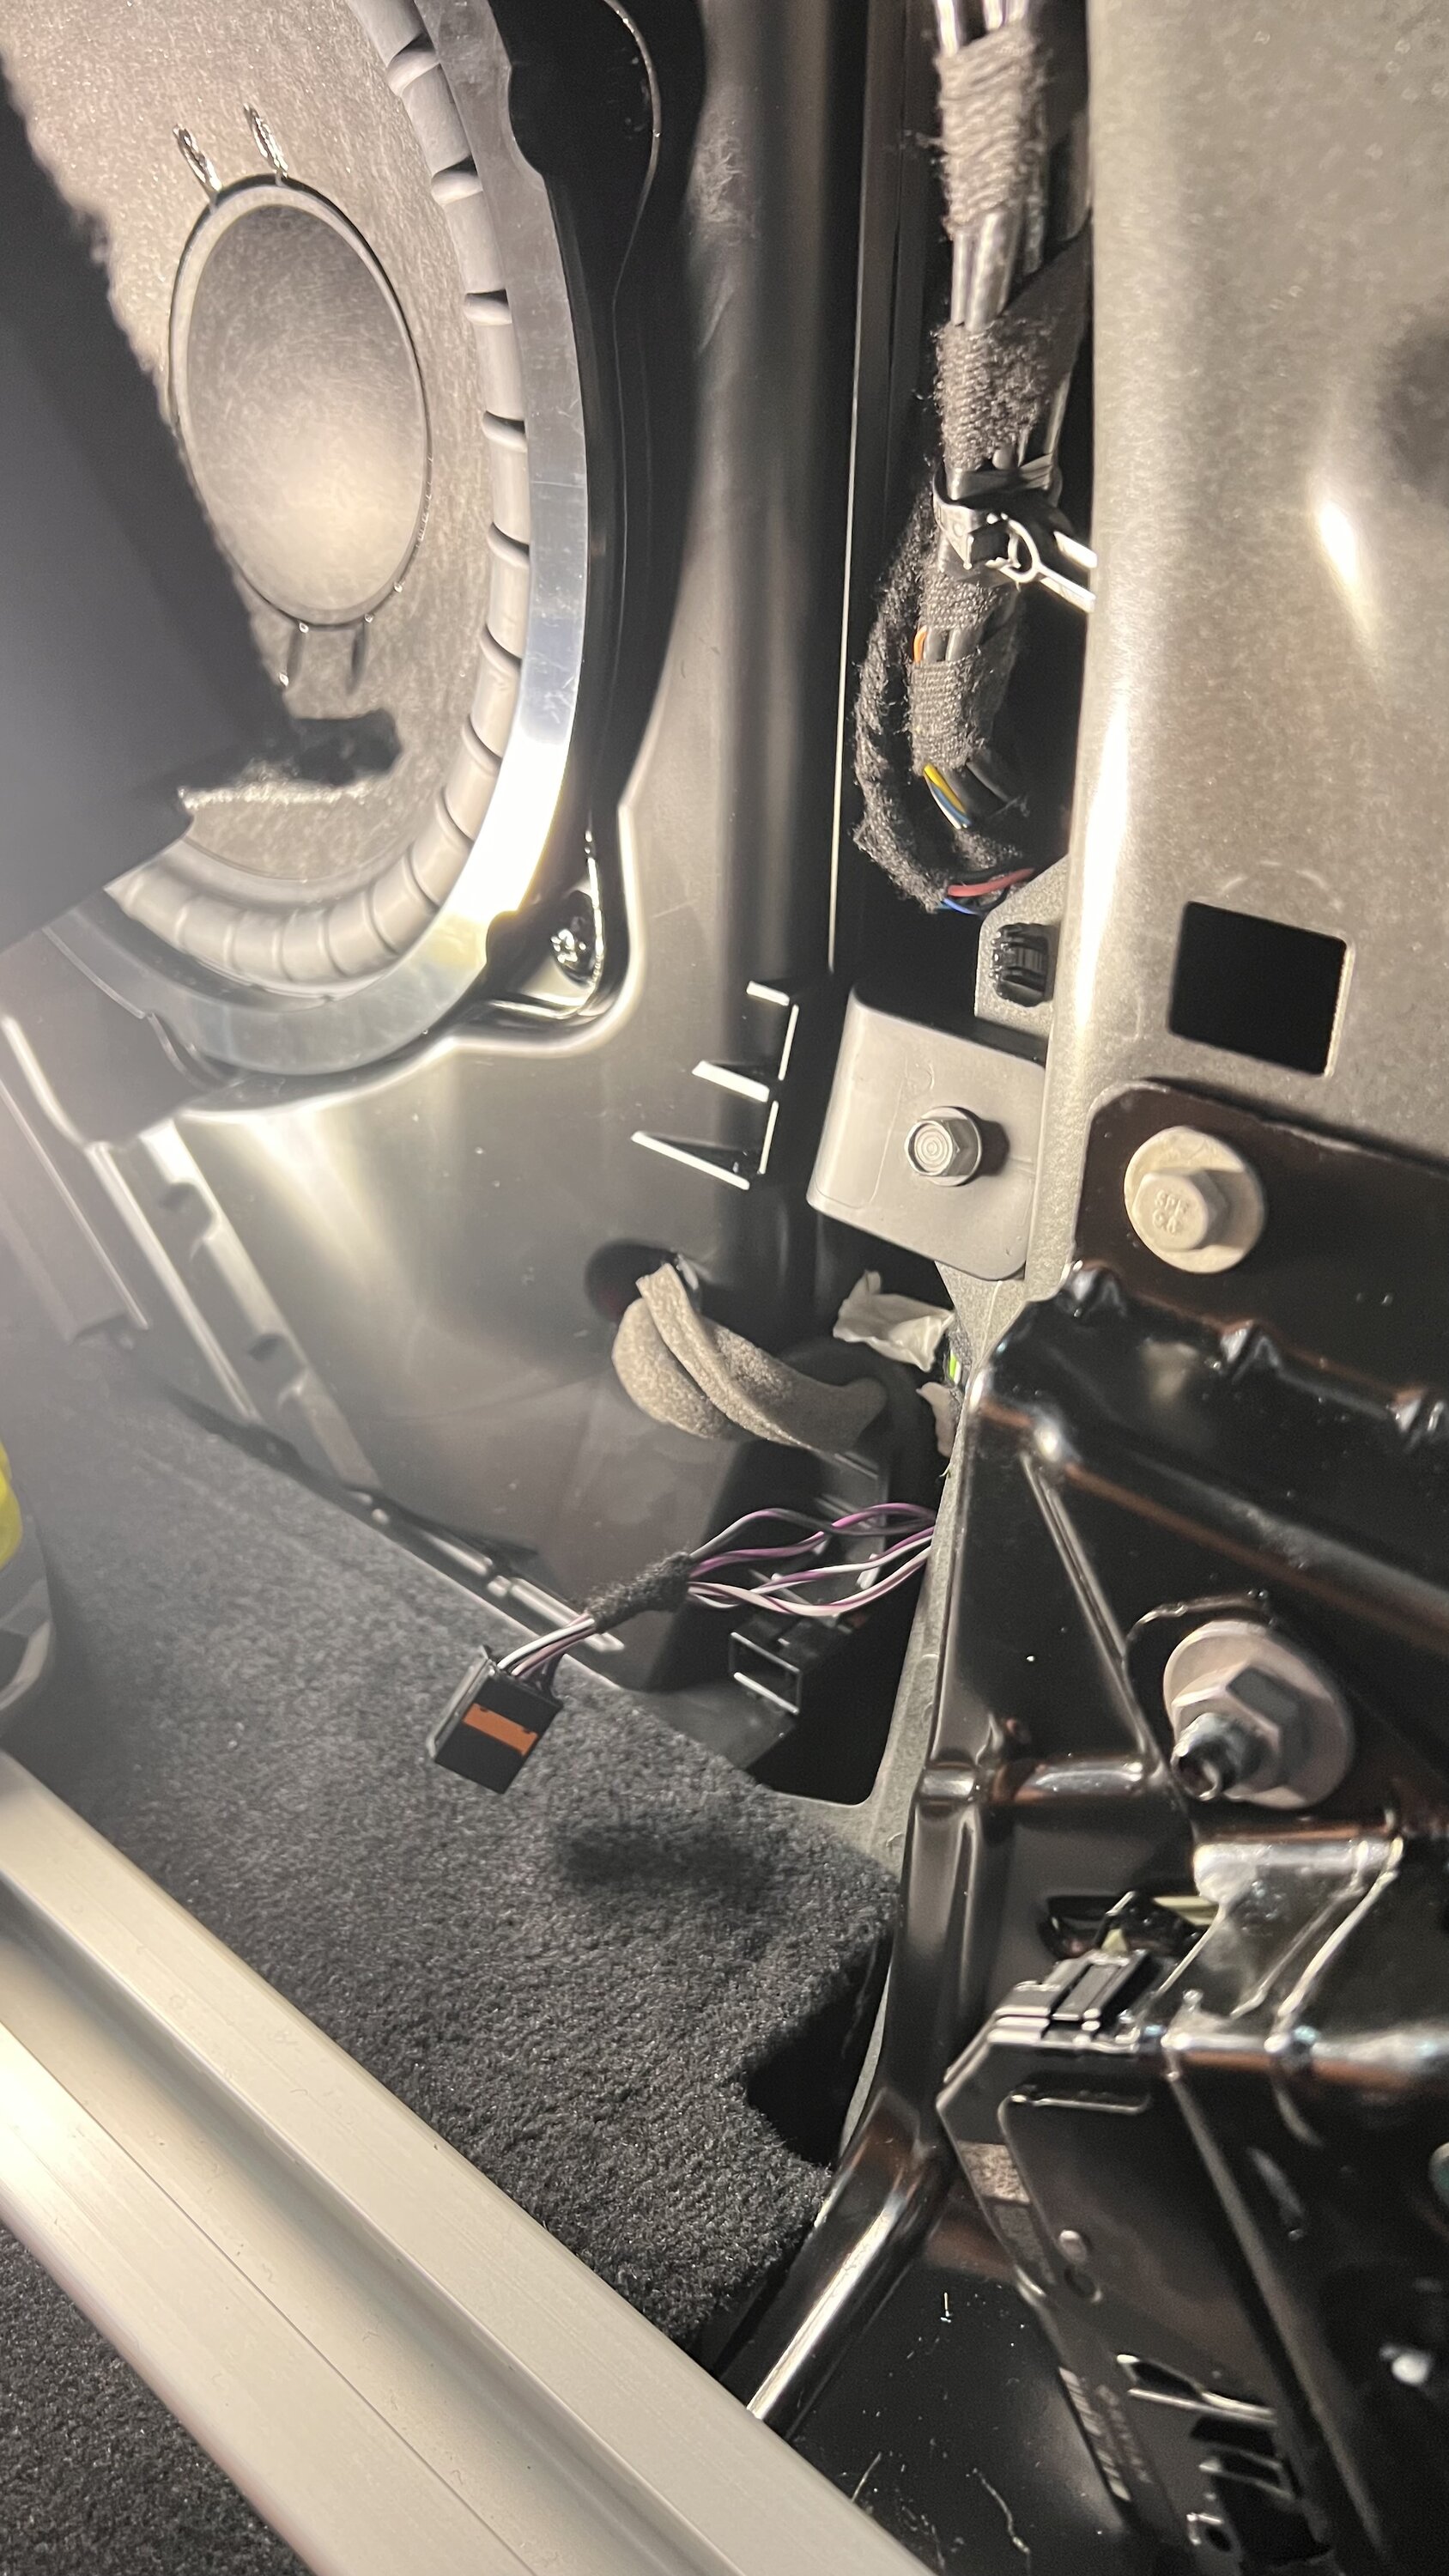 Rivian R1T R1S Teardown: R1S Audio Unit under drivers seat and speaker harness pinnout. IMG_3543